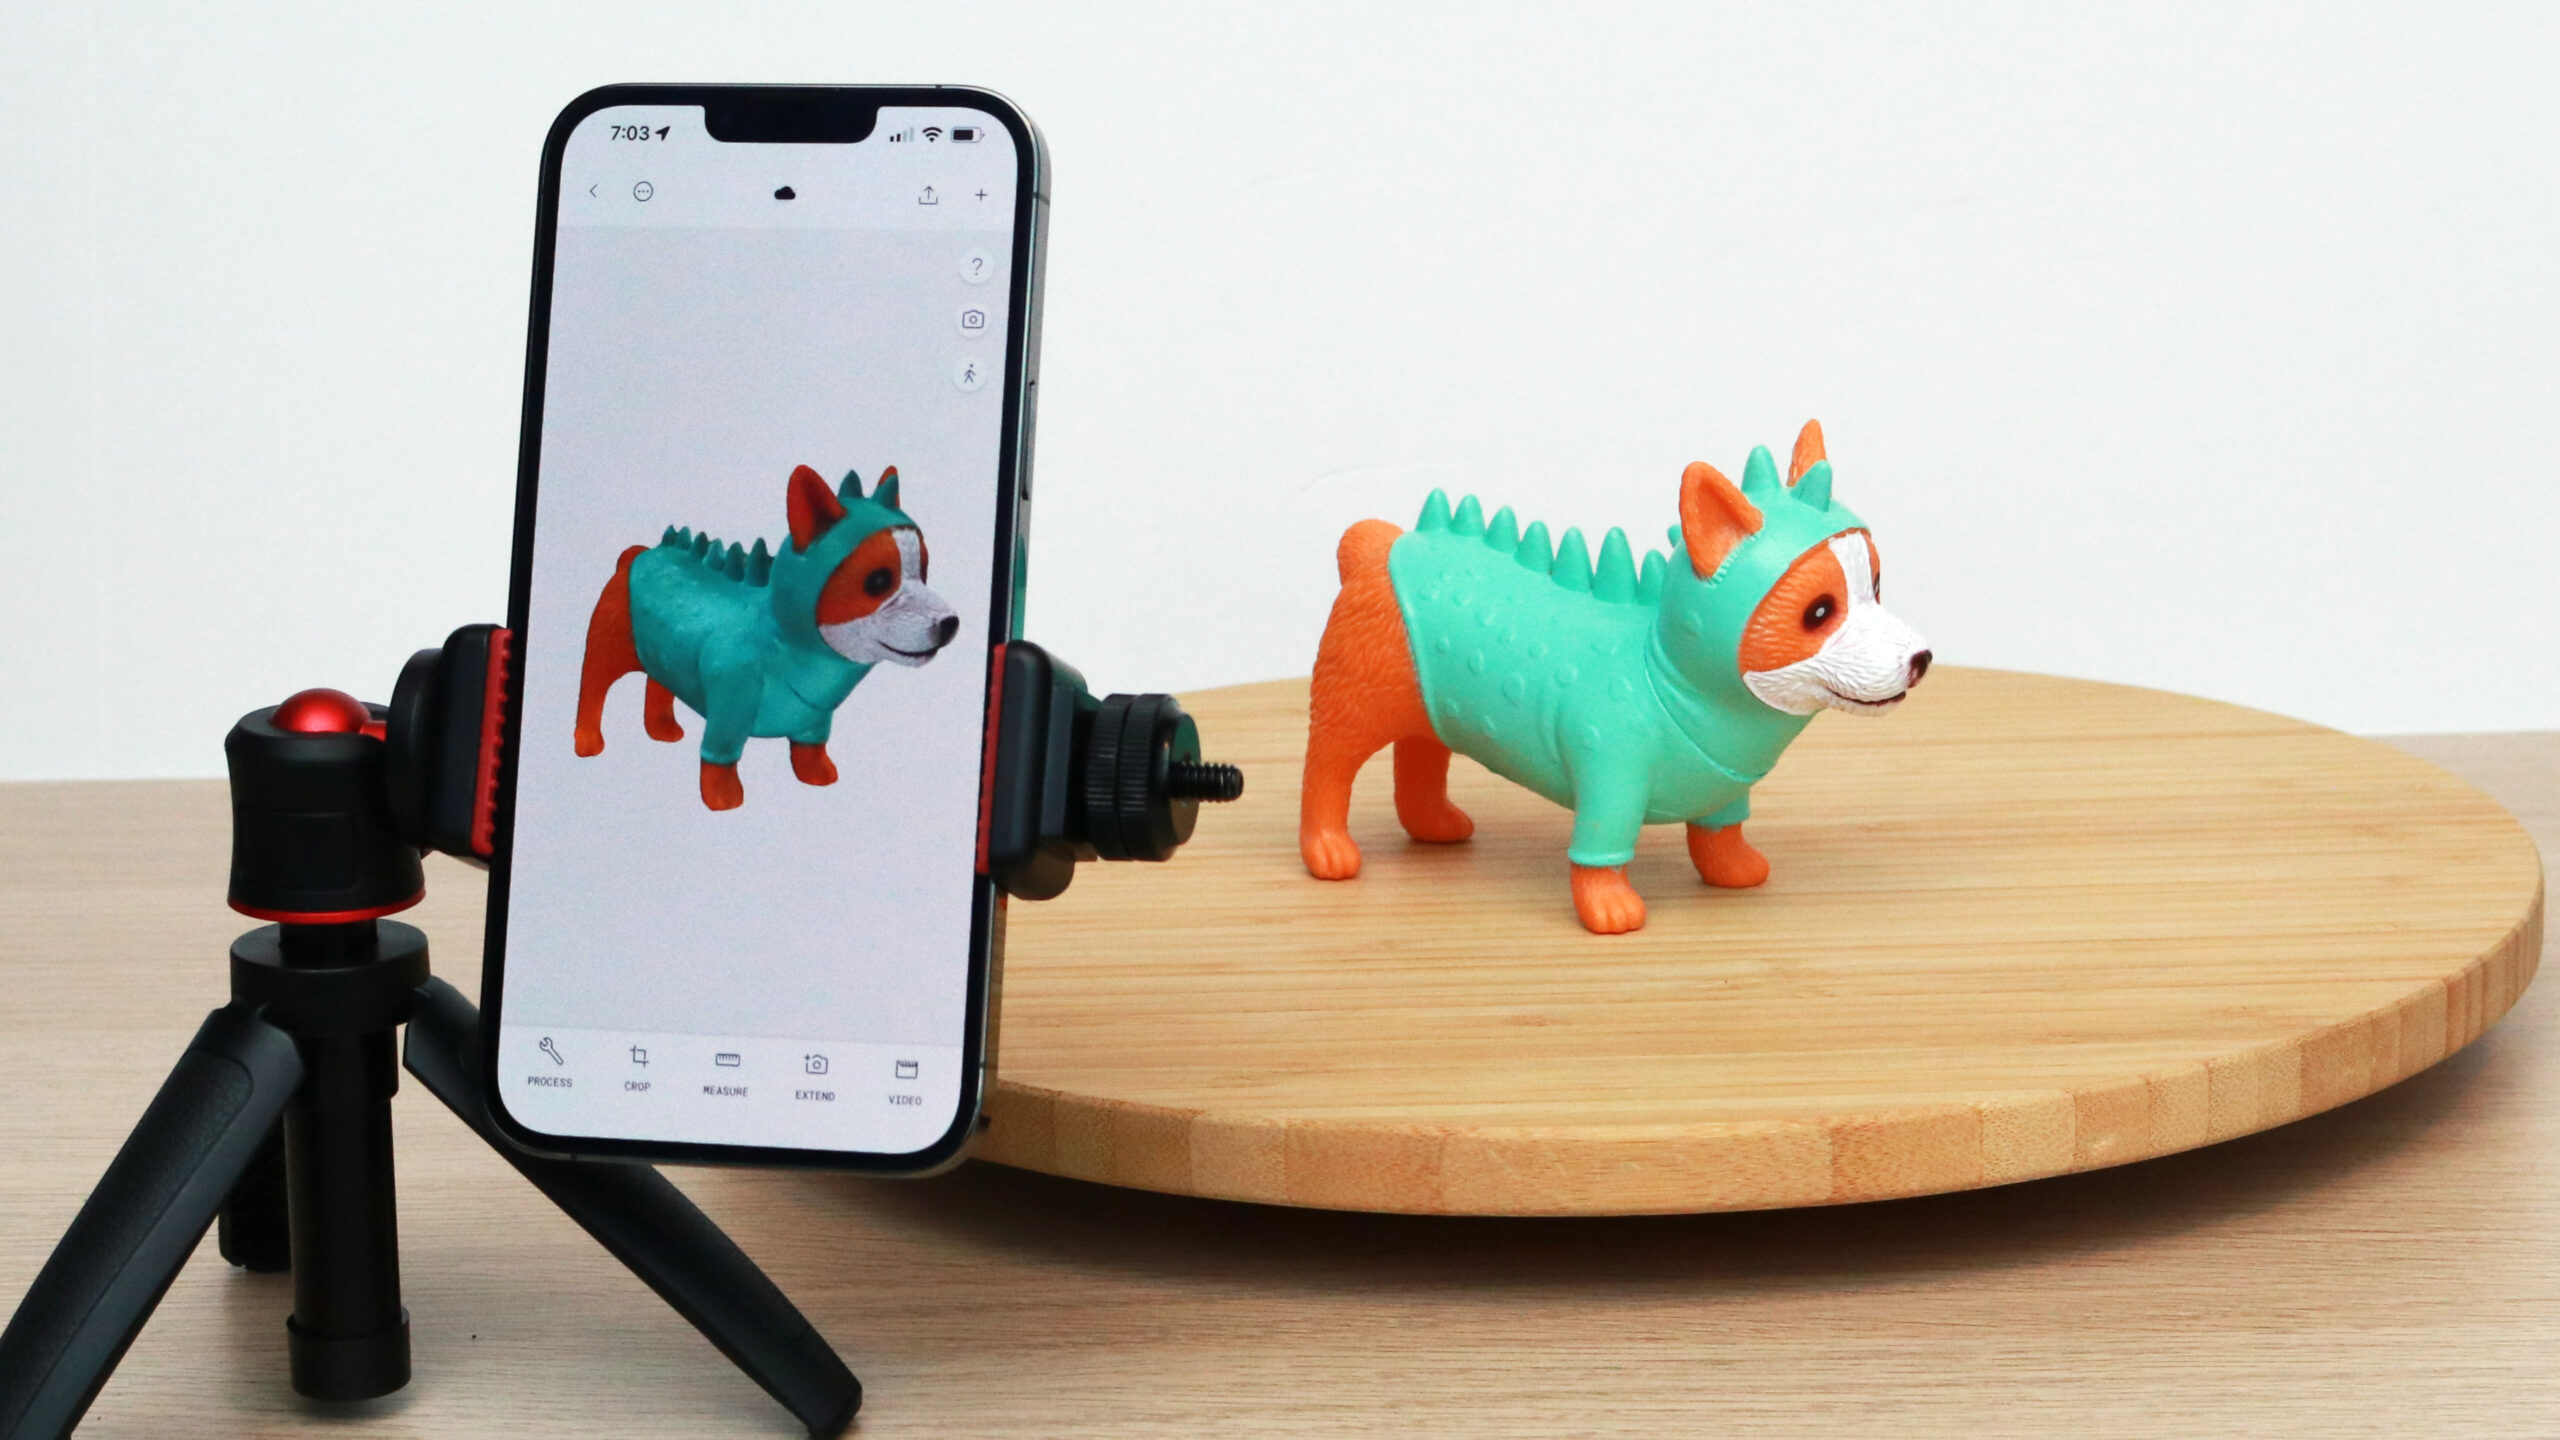 Easy 3D scanning with a phone